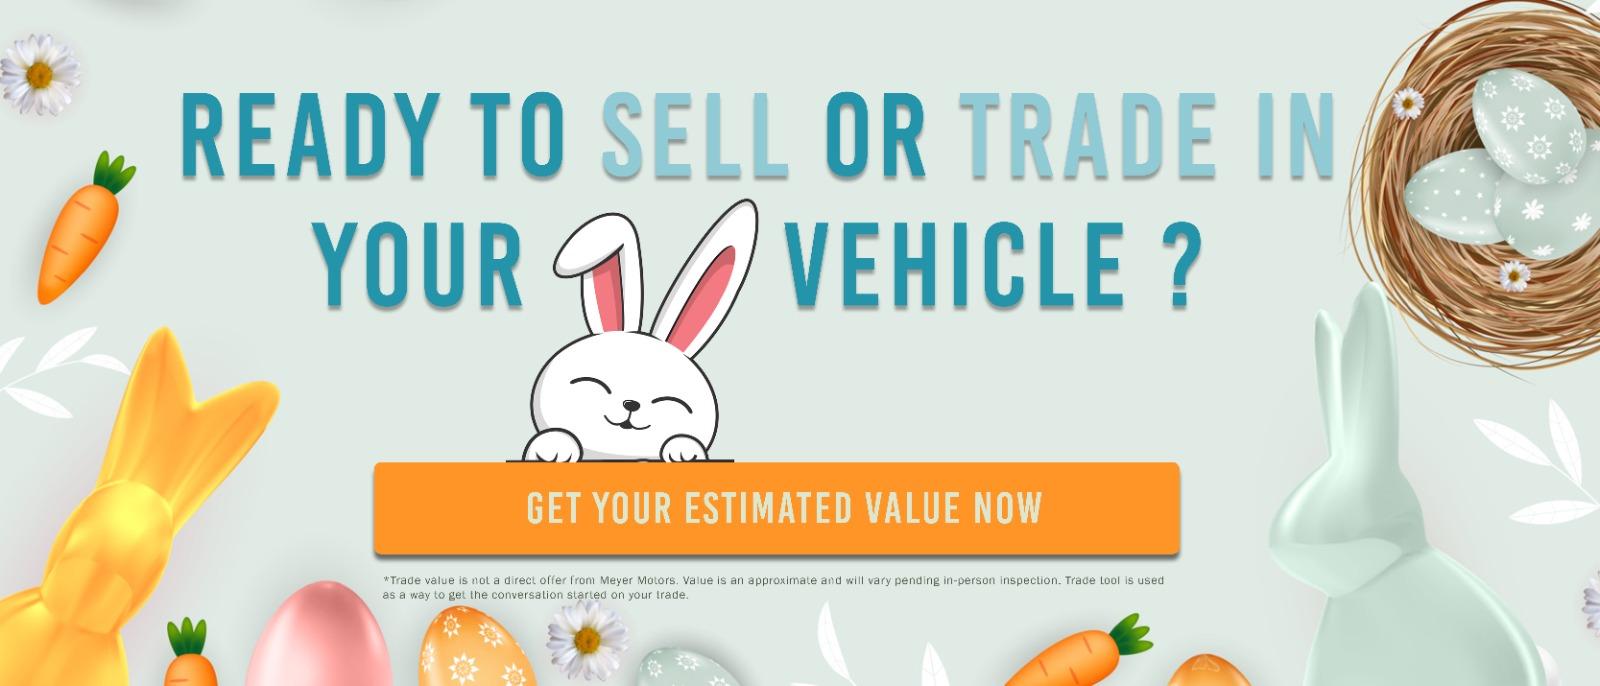 Ready to sell or trade in your vehicle?
Click here for a 10 second vehicle value*